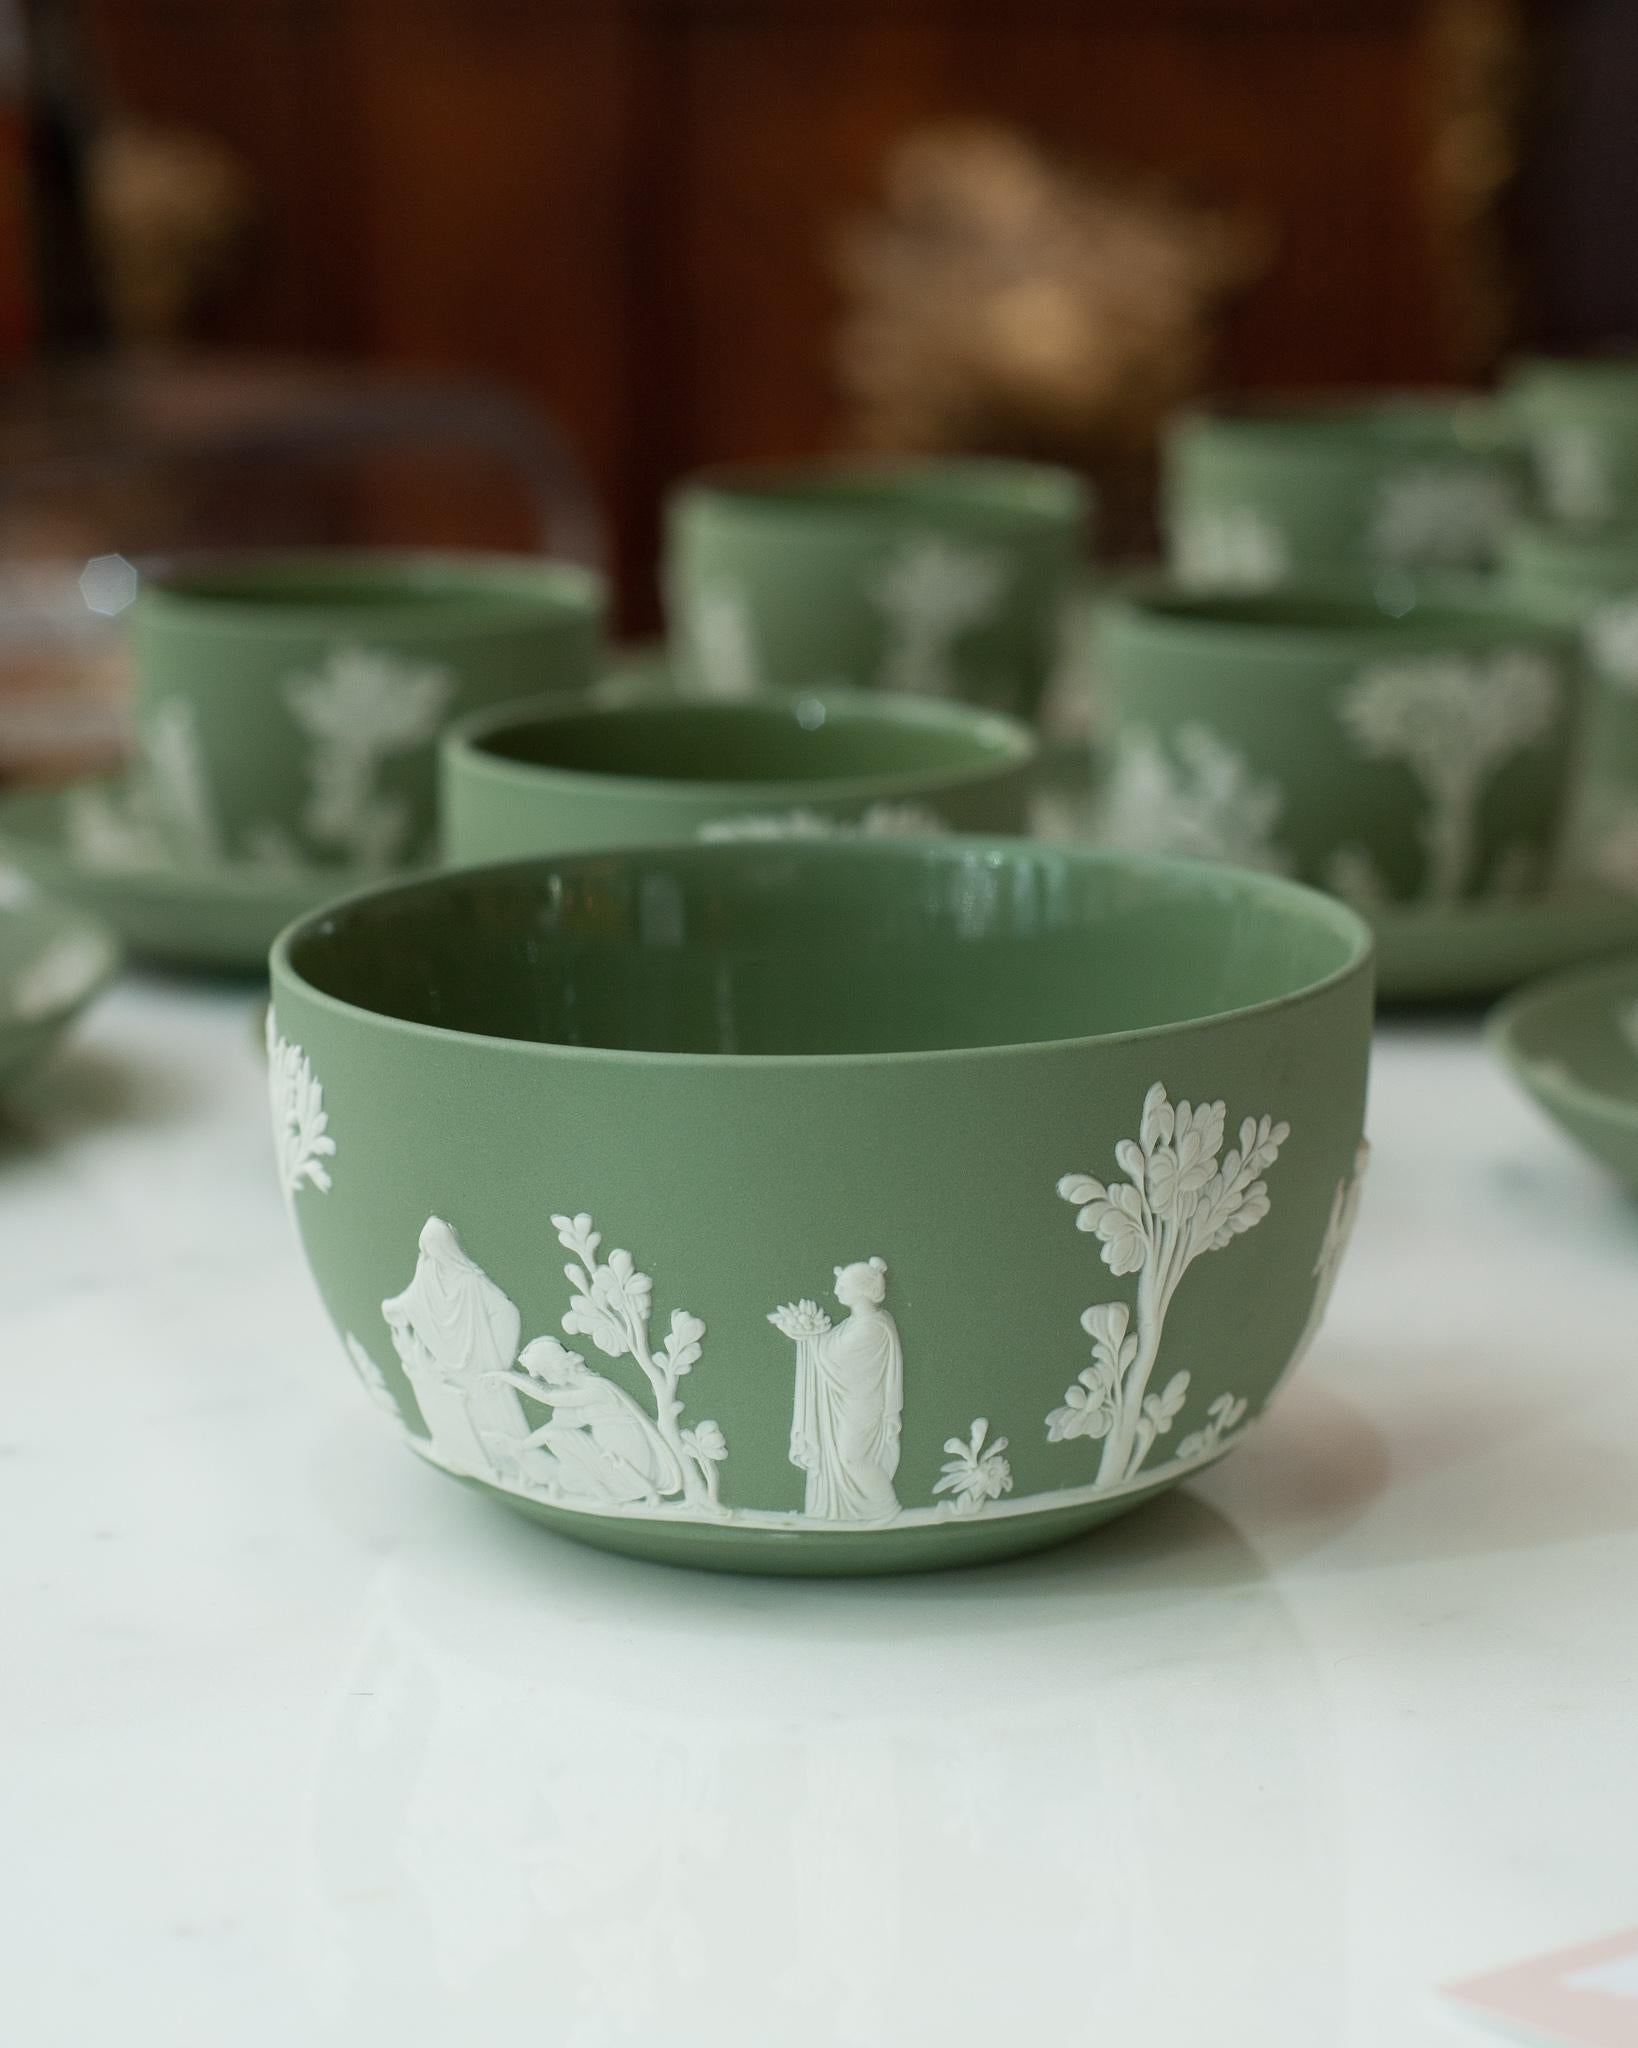 A stunning antique Wedgwood Sage Green Jasperware small bowl with white overlay.